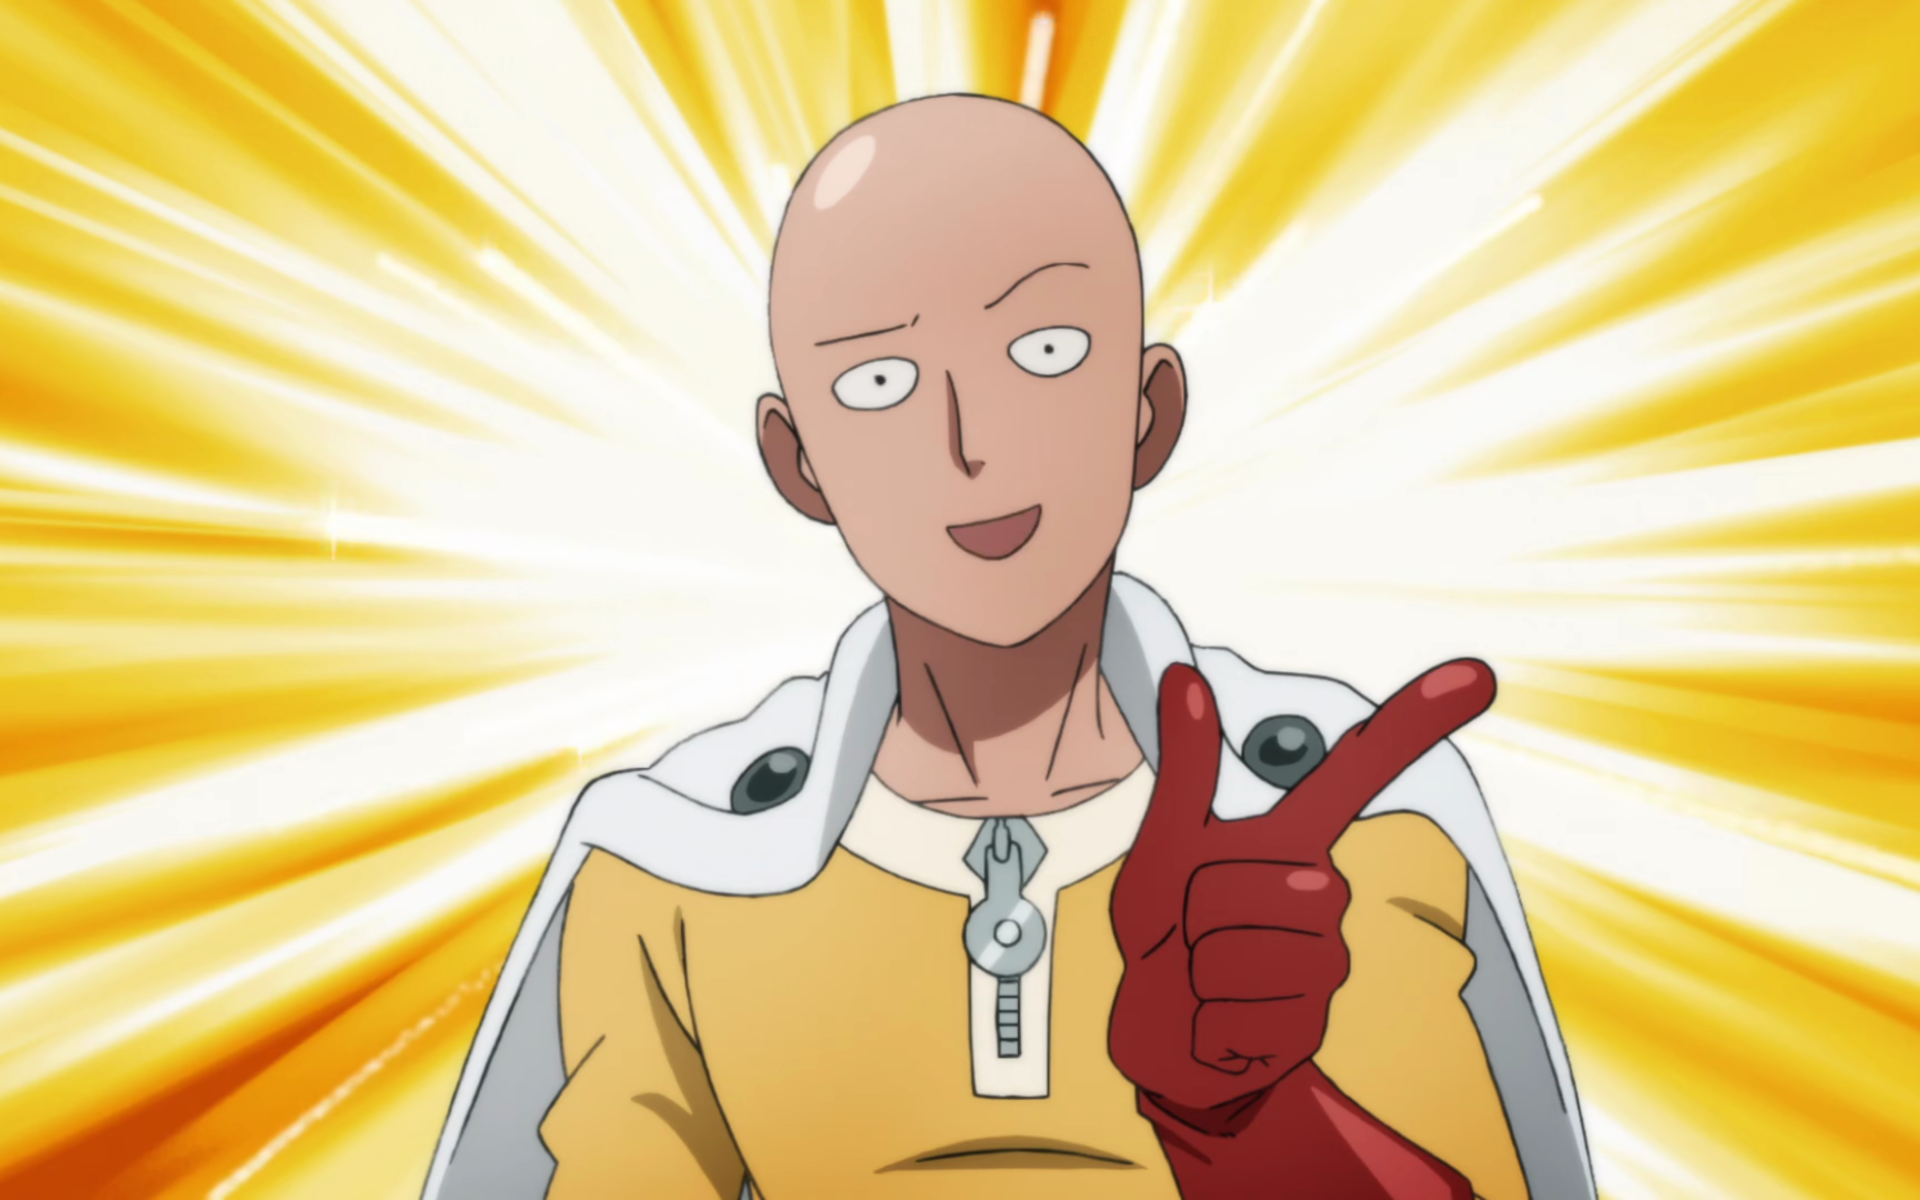 3. "Saitama" from One Punch Man - wide 7